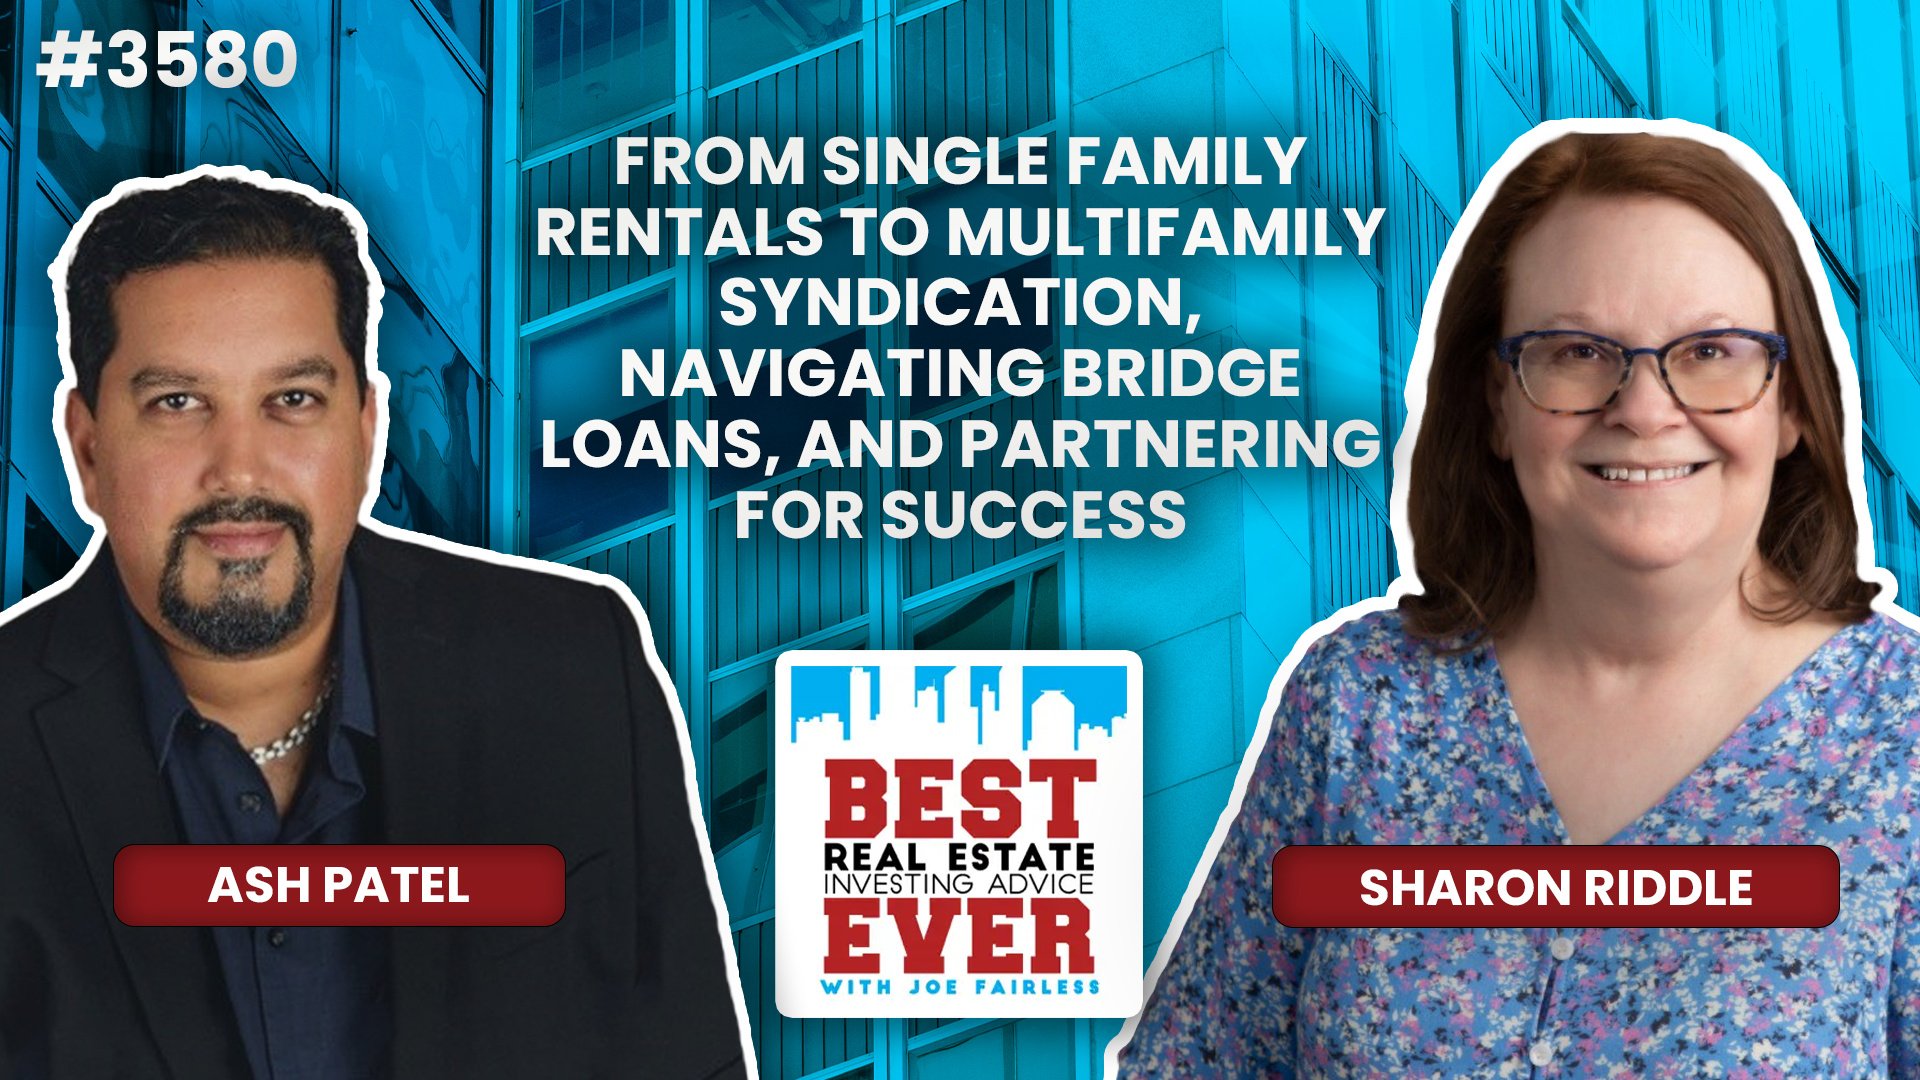 JF3580: From Single Family Rentals to Multifamily Syndication, Navigating Bridge Loans, and Partnering for Success ft. Sharon Riddle